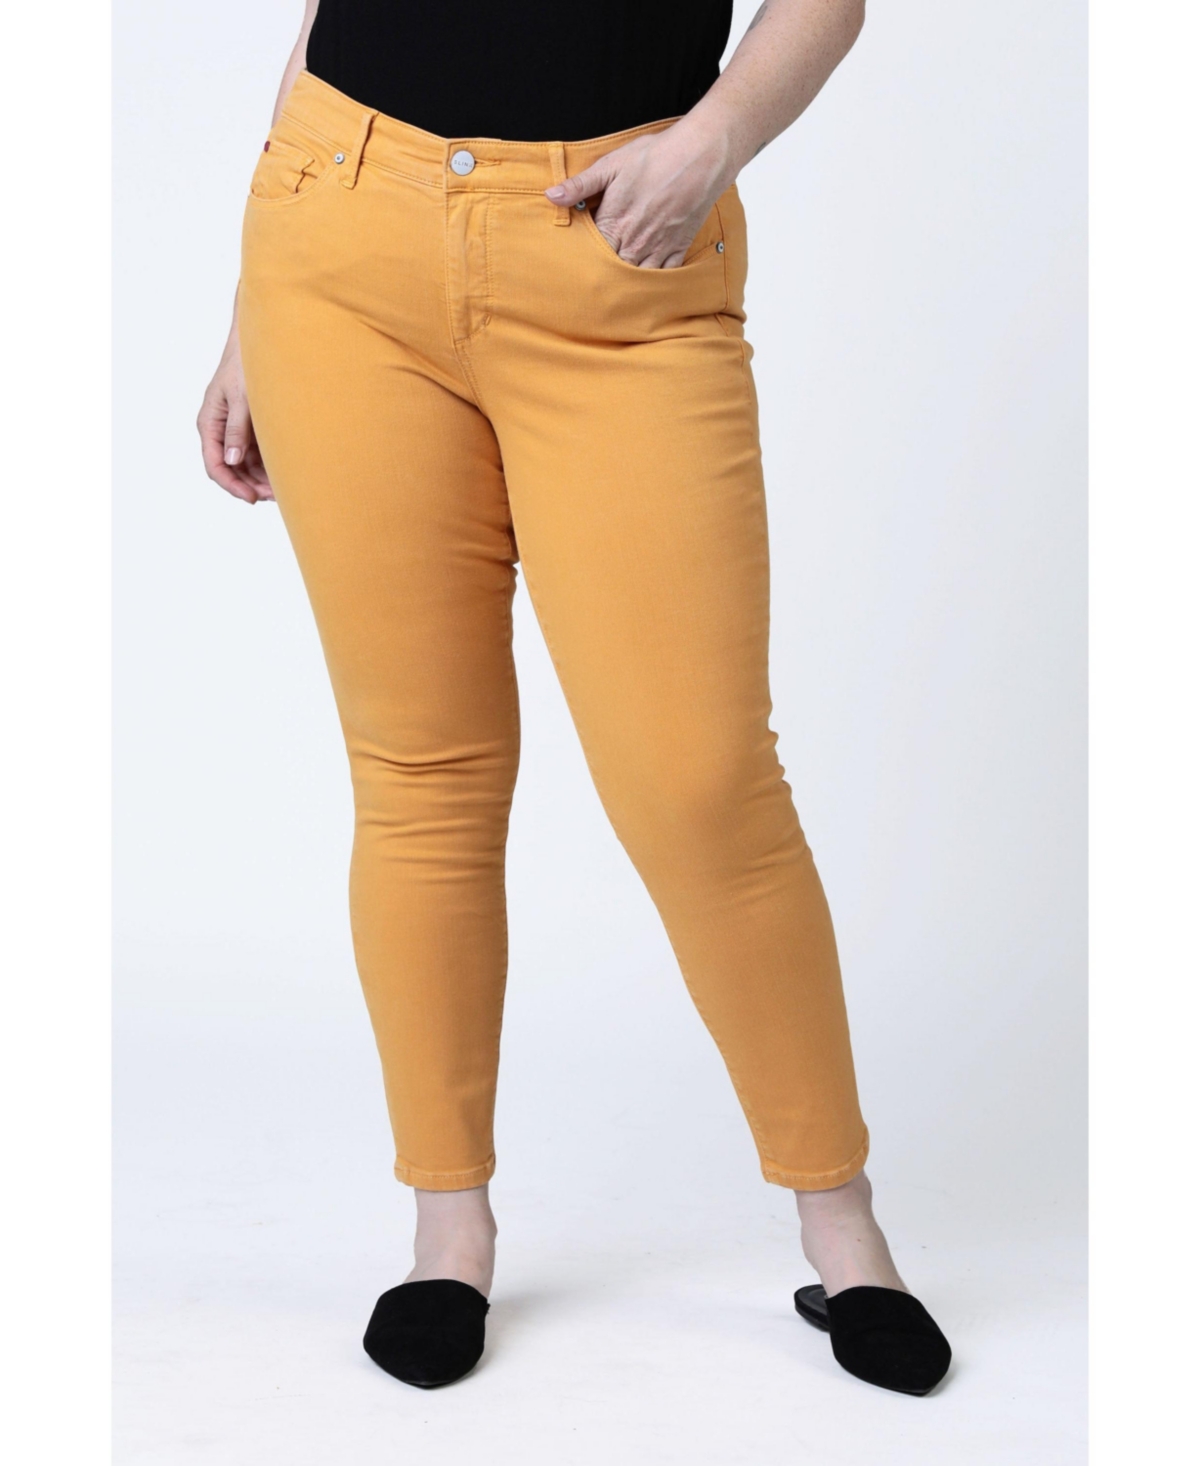 Women's Color Mid Rise Ankle Skinny pants - Clementine